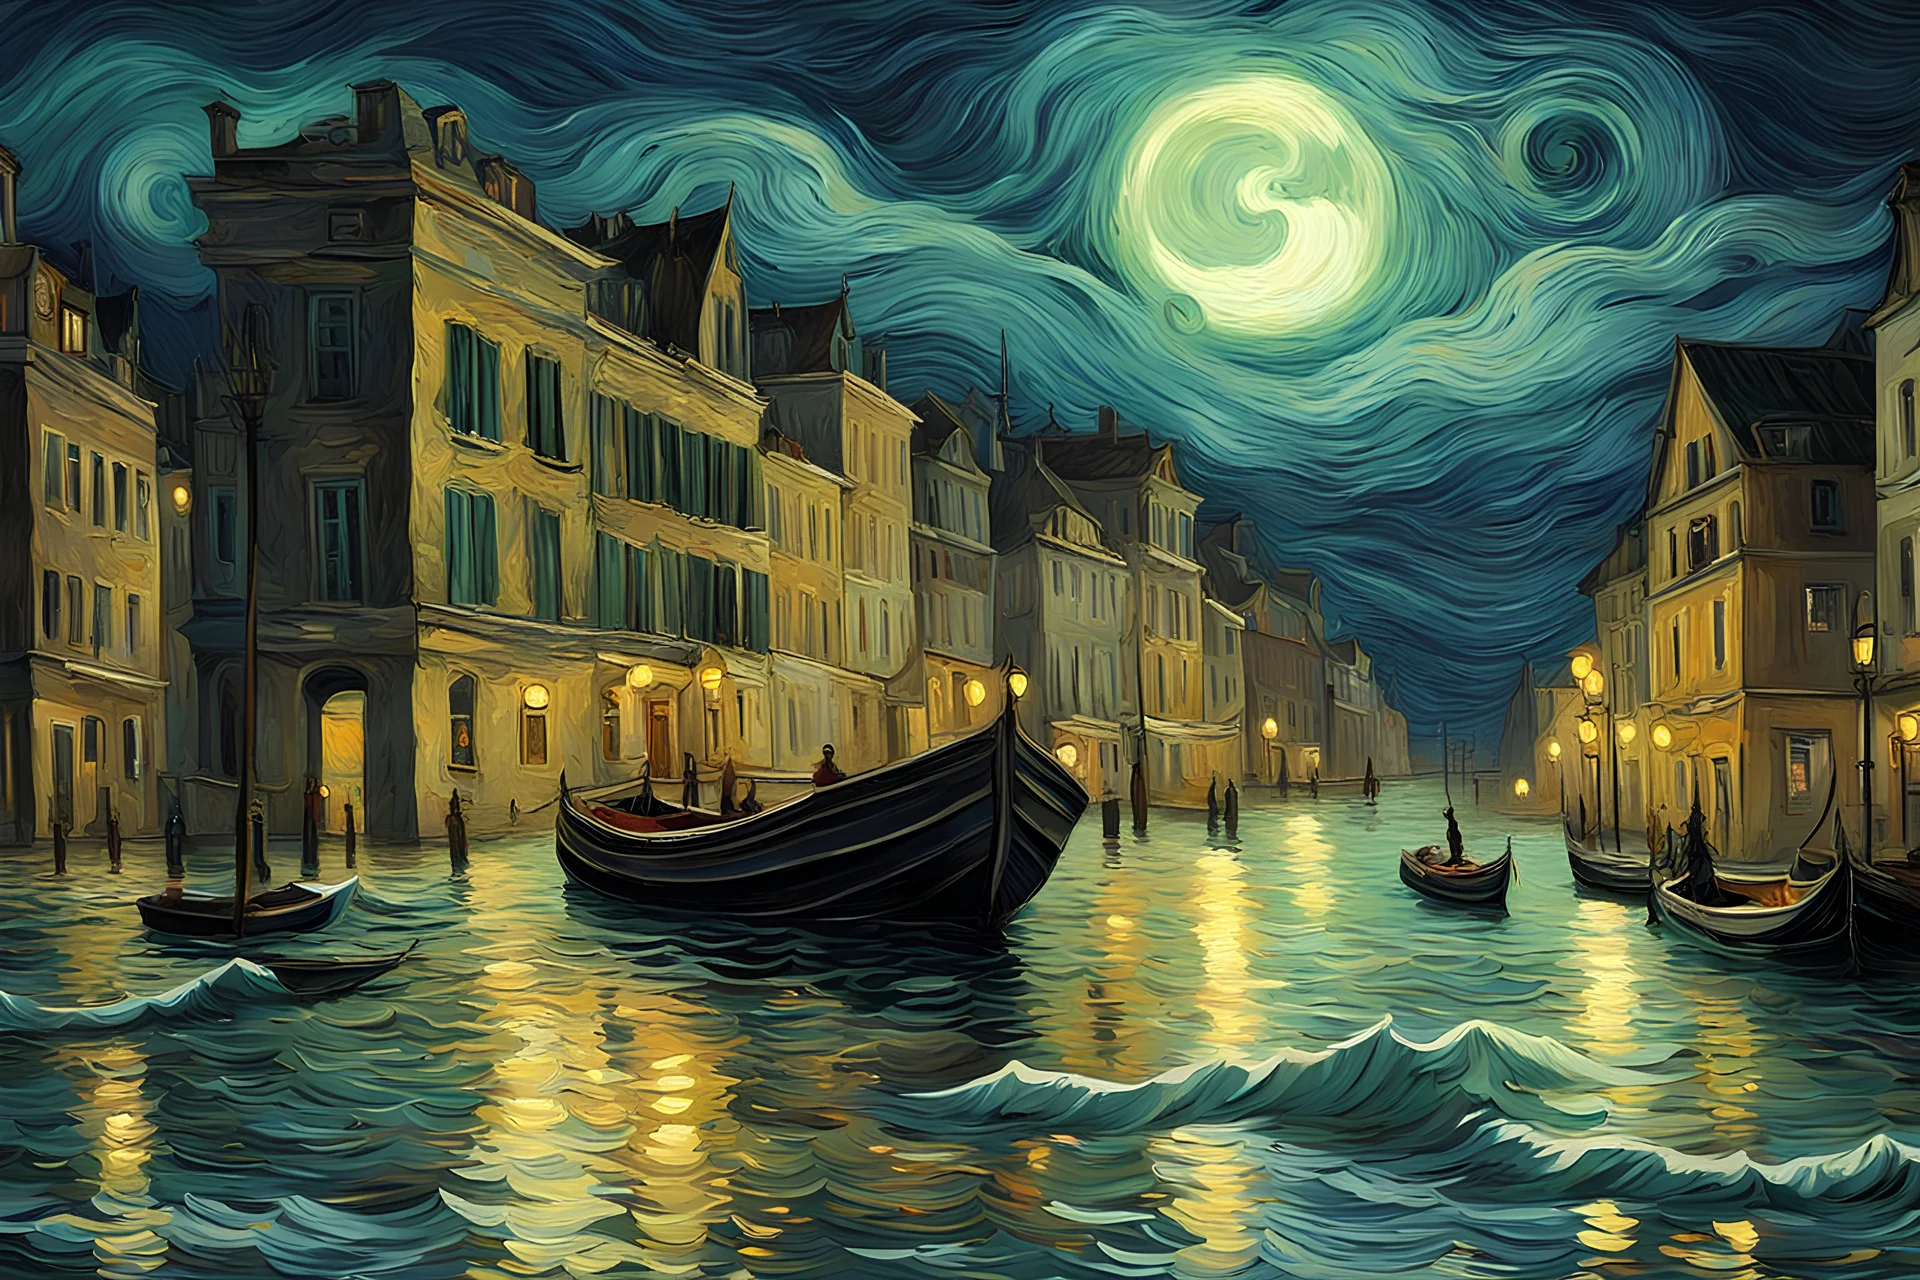 Oceanscape , moonlight, bright, waves, old buildings, reflections, street lights, people on lit boats, digital painting in style of Van Gogh